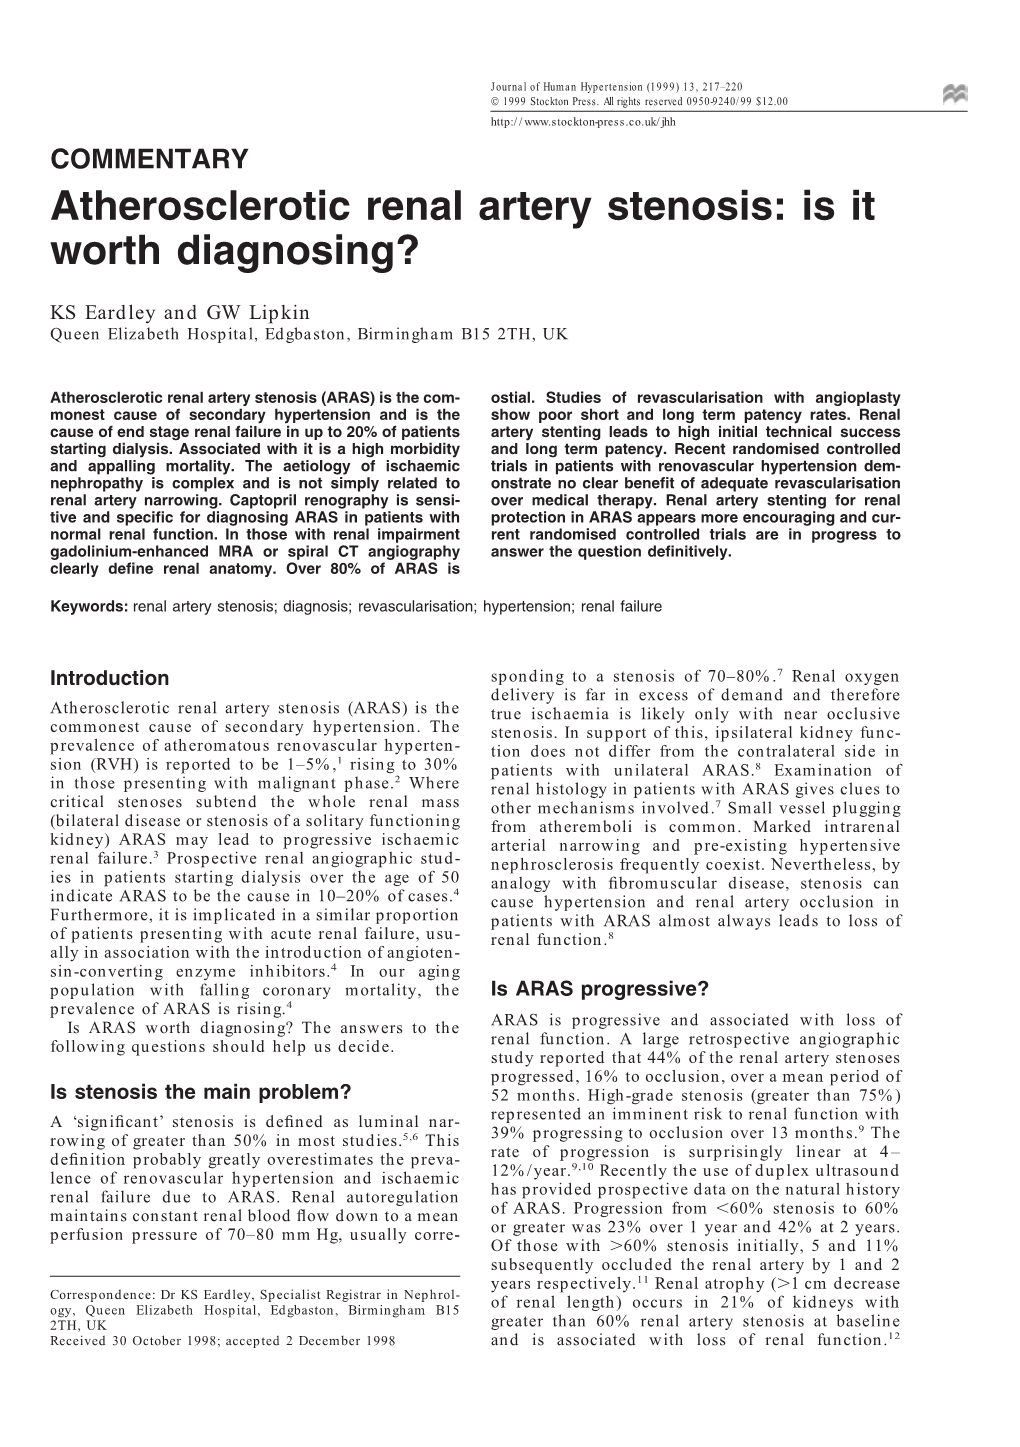 Atherosclerotic Renal Artery Stenosis: Is It Worth Diagnosing?